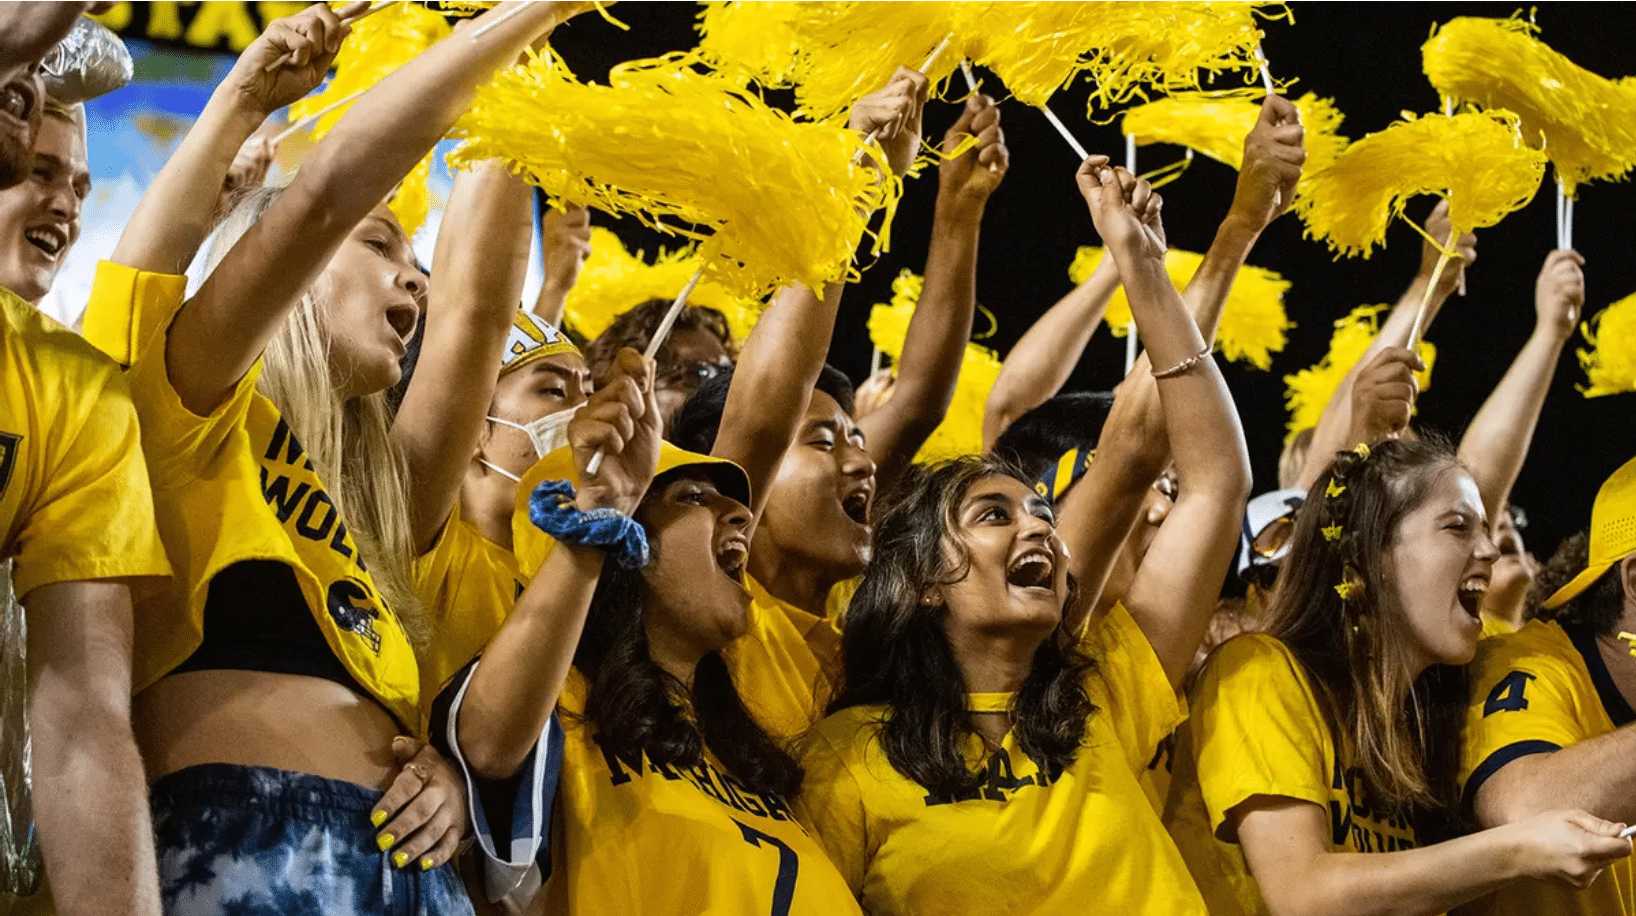 University of Michigan student section, the Wolverines, enthusiastically cheering at a game while wearing yellow and navy, showing their team spirit and pride.